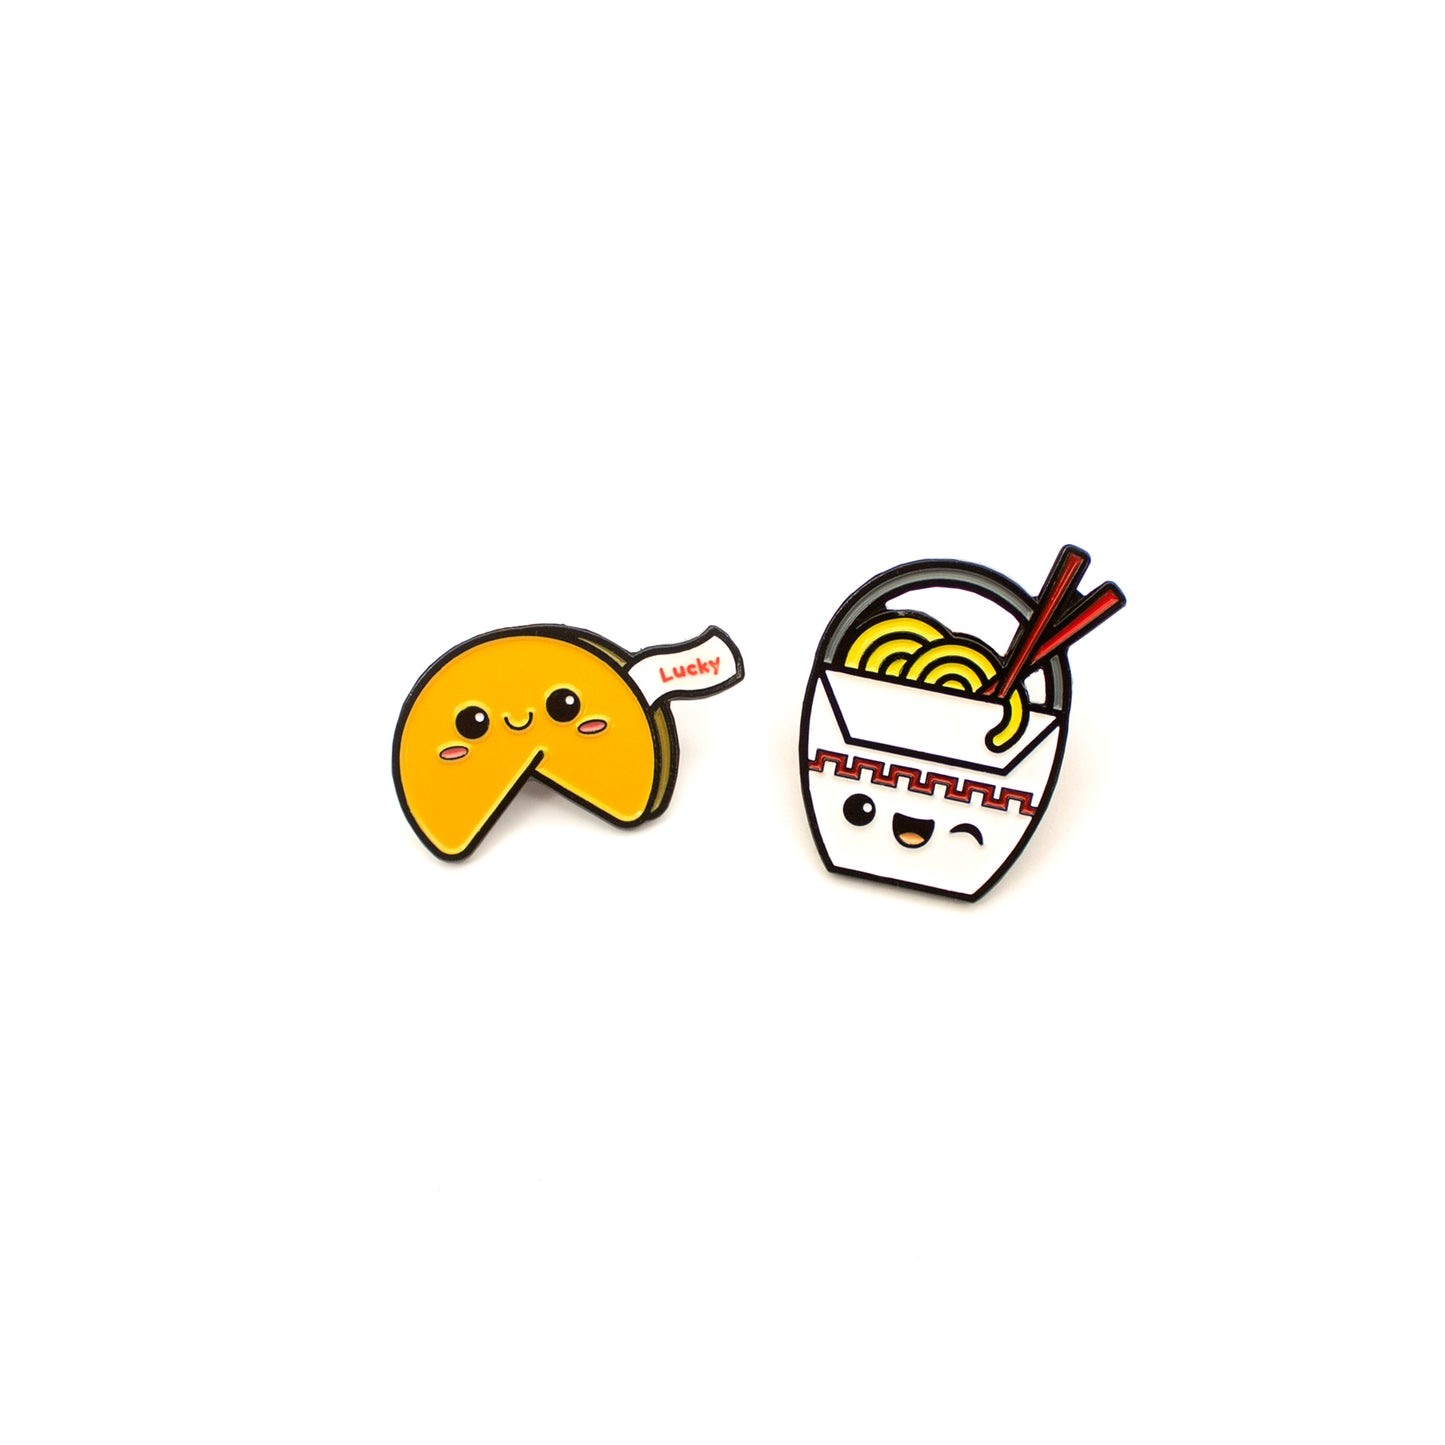 Chinese Takeout and Fortune Cookie enamel pins on white background